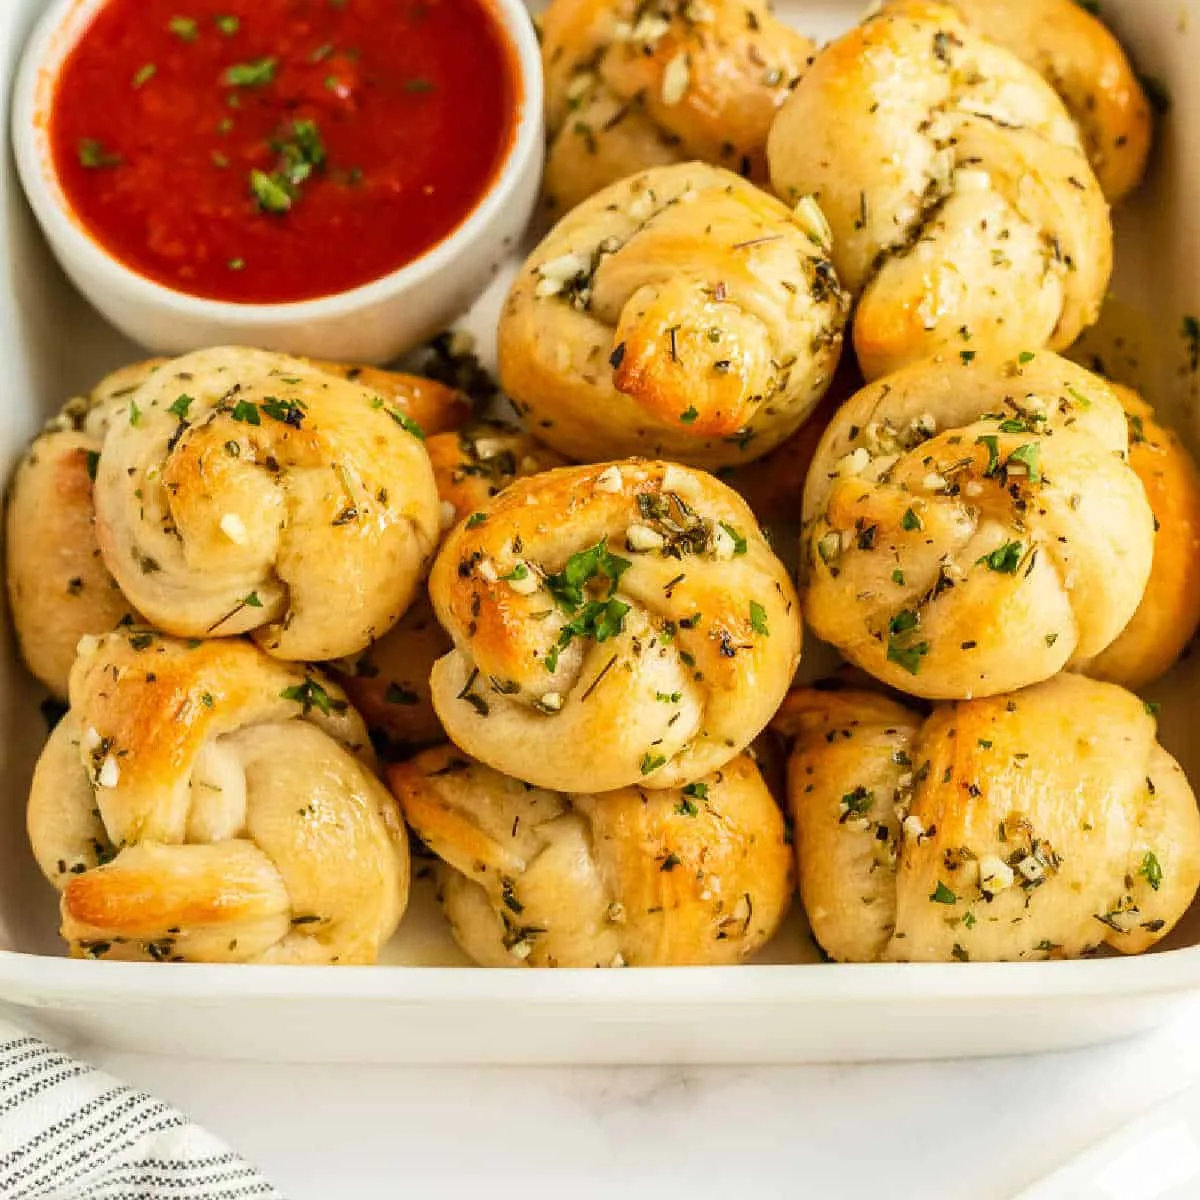 bowl of garlic knots with tomato sauce